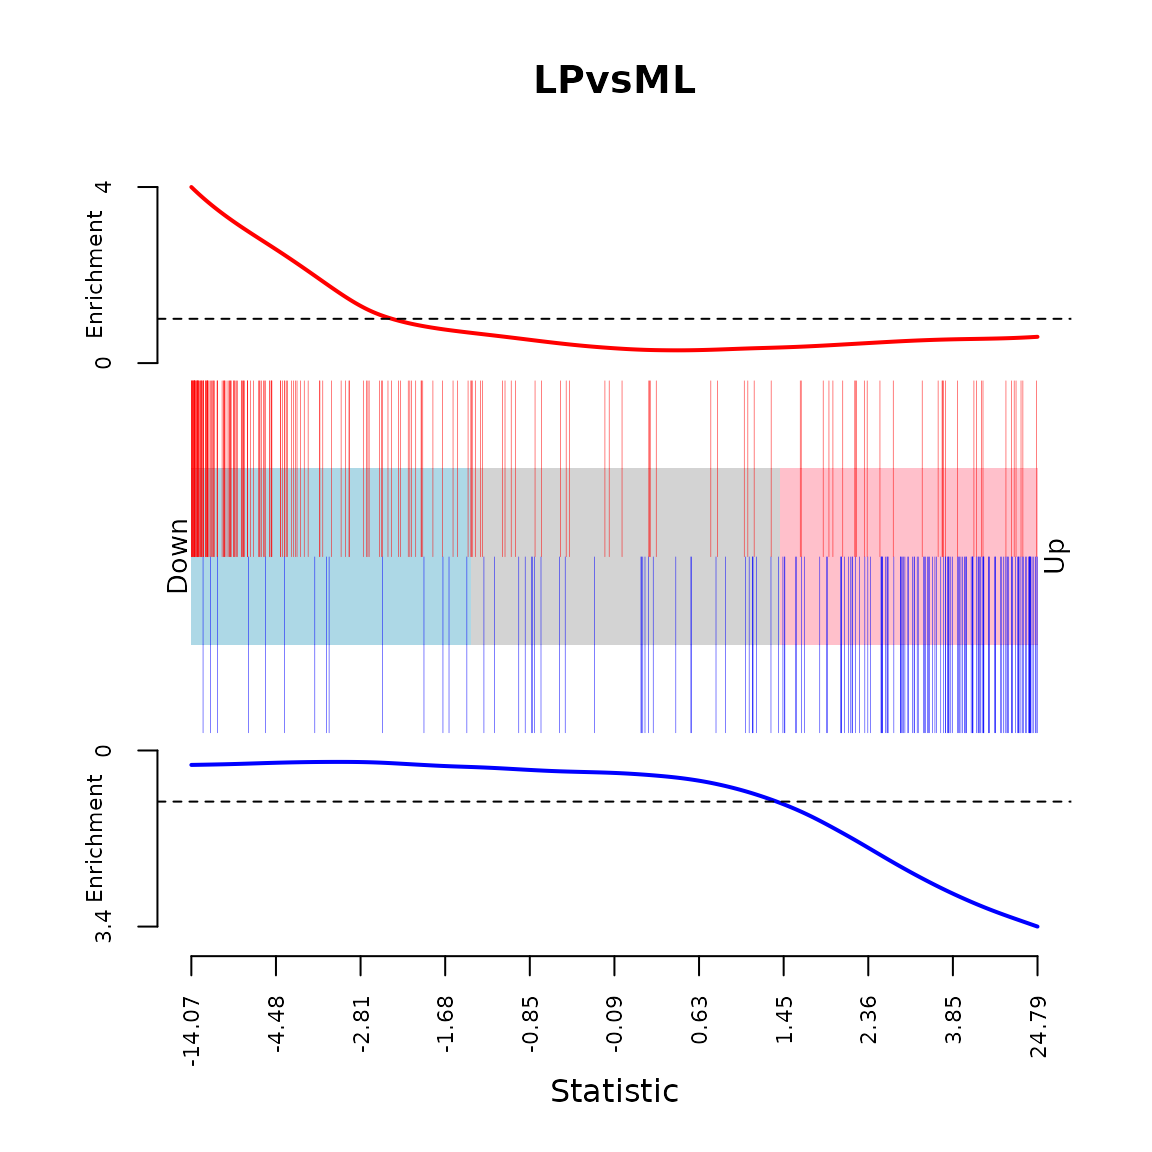 Barcode plot of `LIM_MAMMARY_LUMINAL_MATURE_UP` (red bars, top of plot) and `LIM_MAMMARY_LUMINAL_MATURE_DN` (blue bars, bottom of plot) gene sets in the LP versus ML contrast. For each set, an enrichment line that shows the relative enrichment of the vertical bars in each part of the plot is displayed. The experiment of Lim *et al.* [@Lim:BreastCancerRes:2010] is very similar to the current one, with the same sorting strategy used to obtain the different cell populations, except that microarrays were used instead of RNA-seq to profile gene expression. Note that the inverse correlation (the up gene set is down and the down gene set is up) is a result of the way the contrast has been set up (LP versus ML) -- if reversed, the directionality would agree.